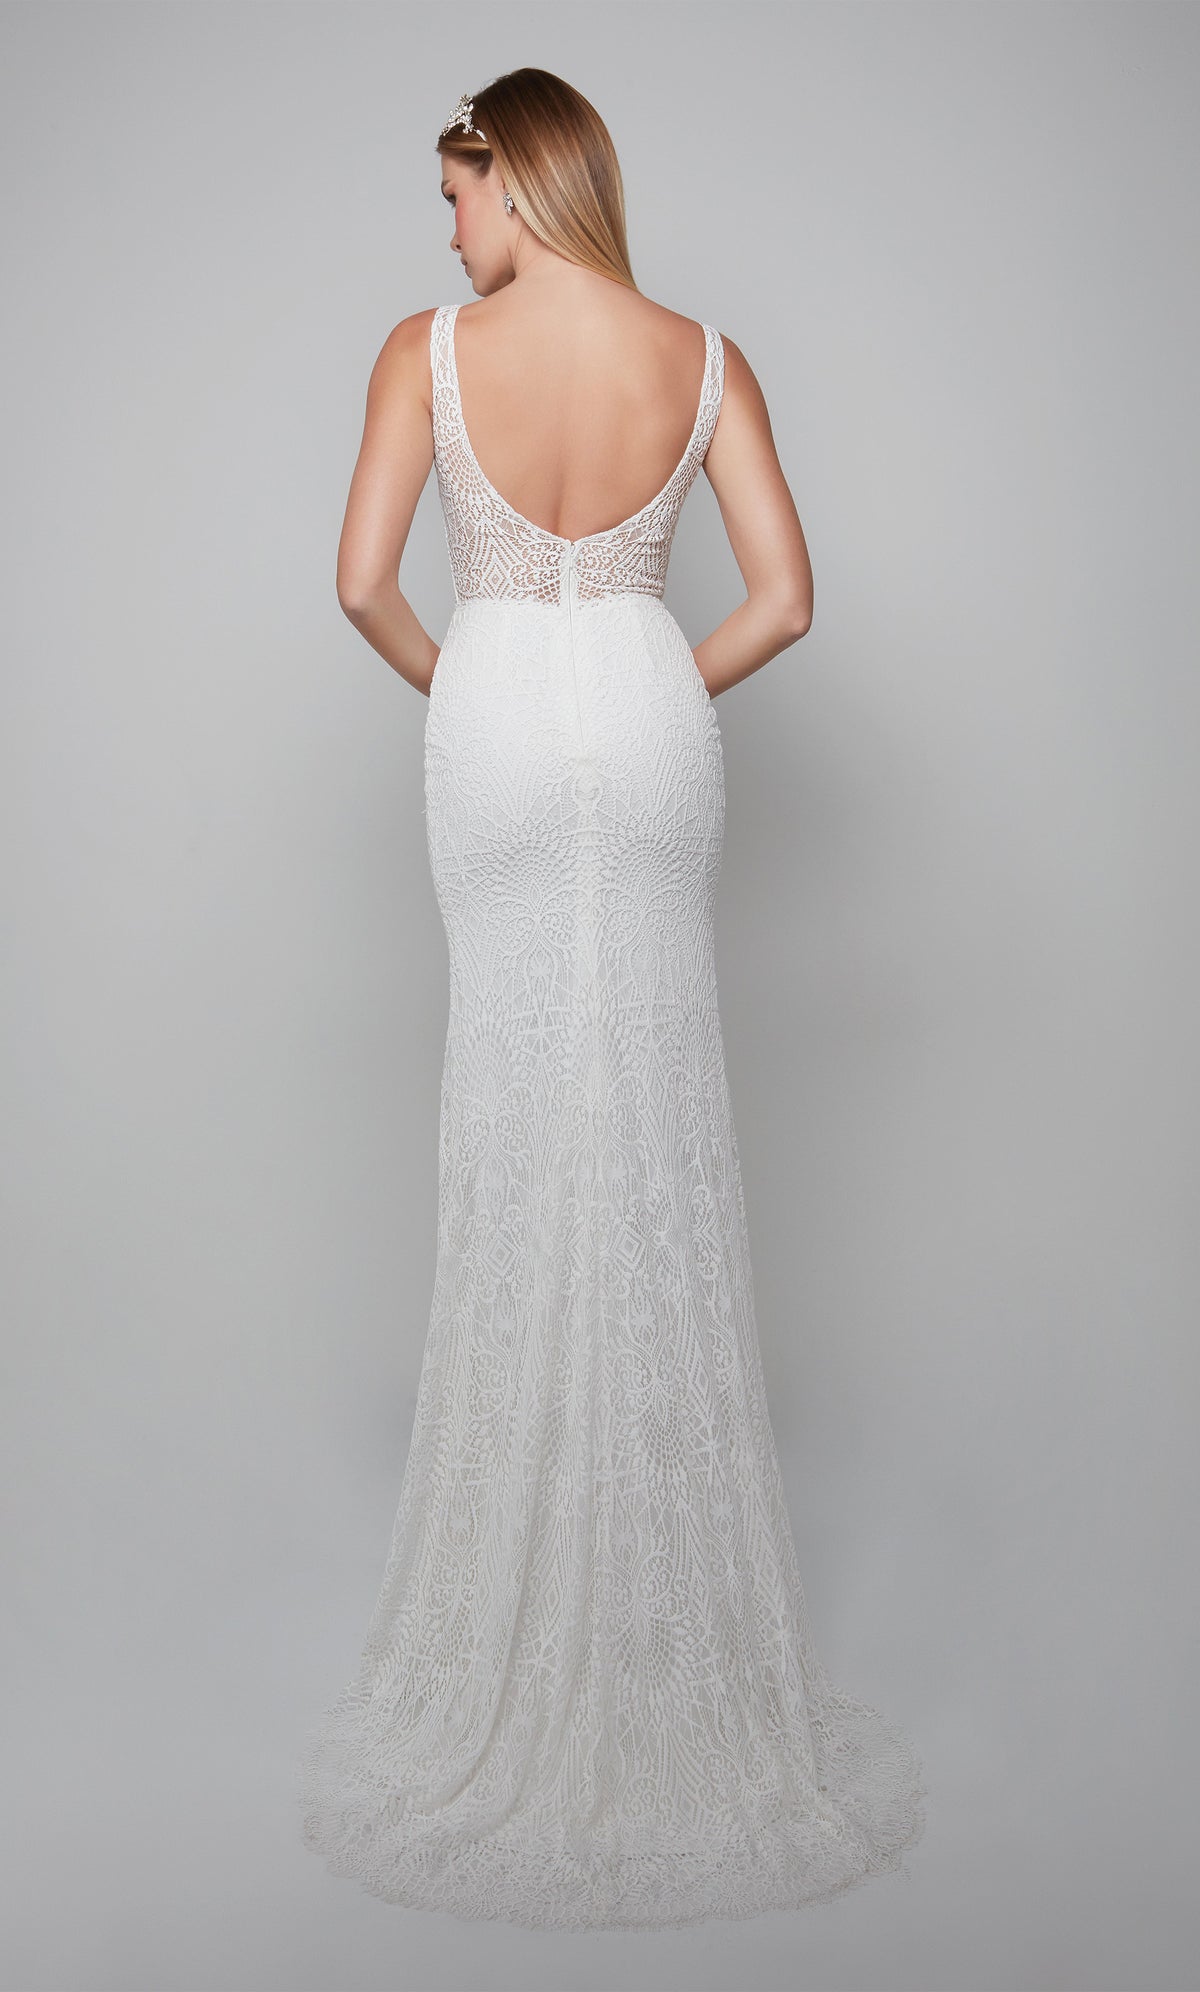 Boho chic wedding gown with a scooped open back and train in ivory.